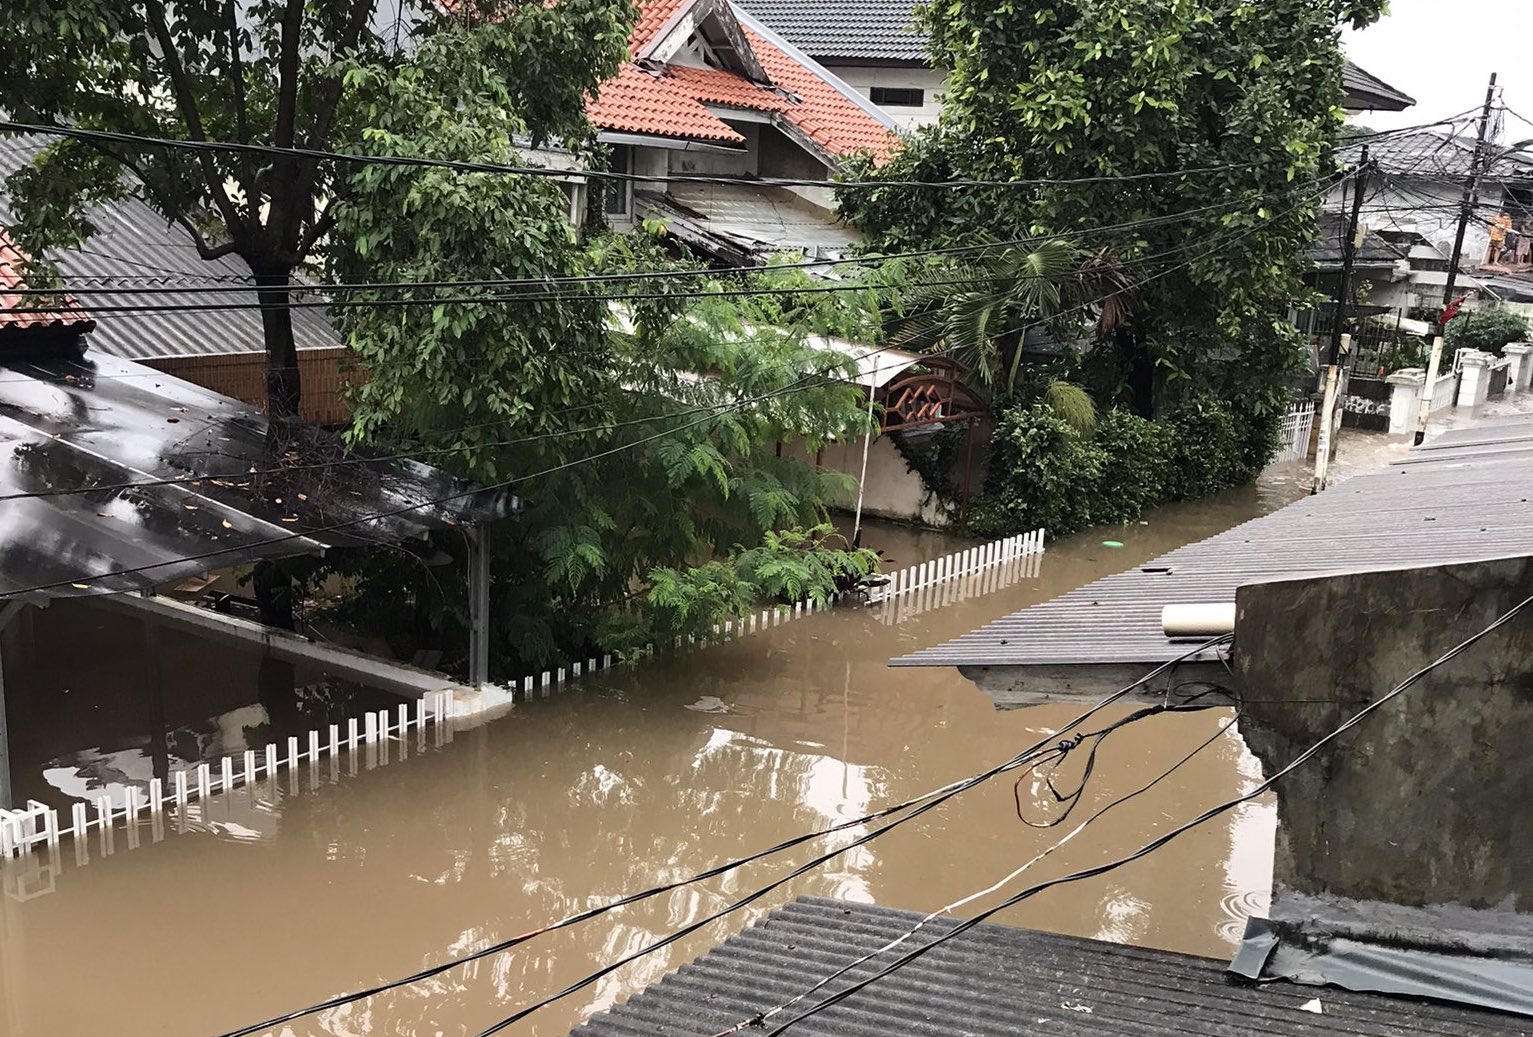 Floodwater almost submerging the first floor of houses in a neighborhood in Mampang, South Jakarta on Feb. 20. Photo: @infojakarta